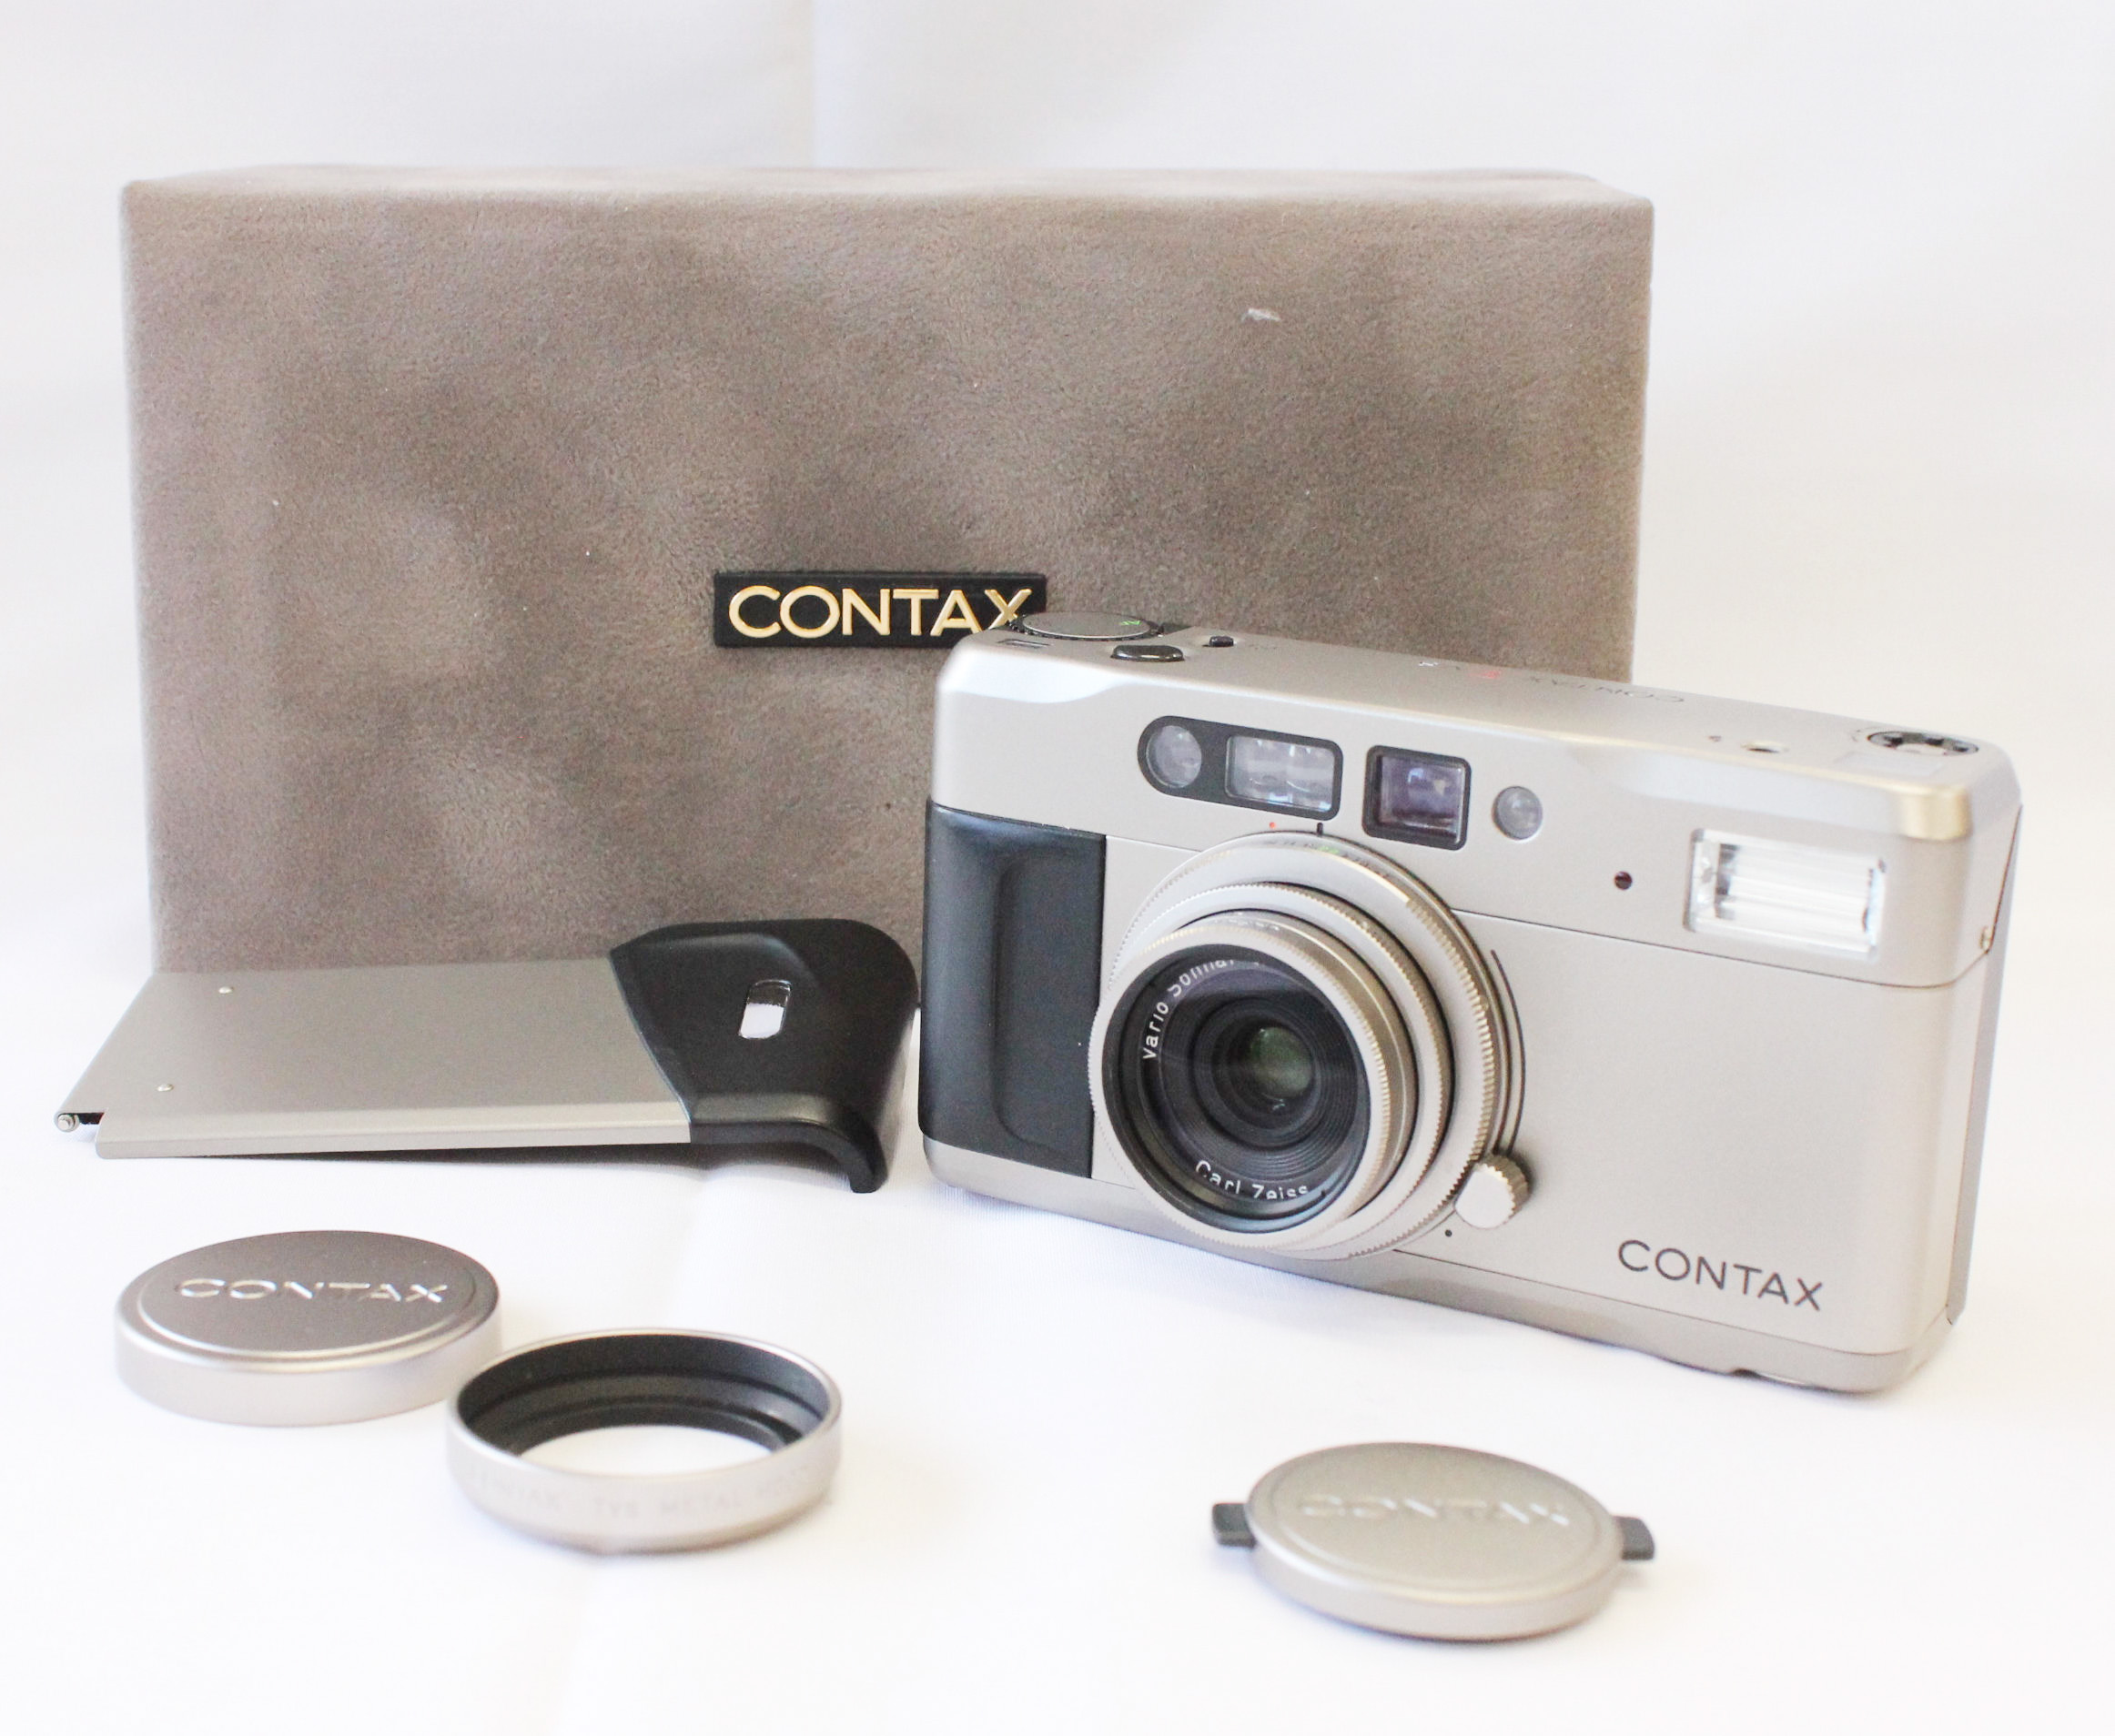 Japan Used Camera Shop | [As Is] Contax TVS 35mm Point & Shoot Film Camera w/ Data Back from Japan